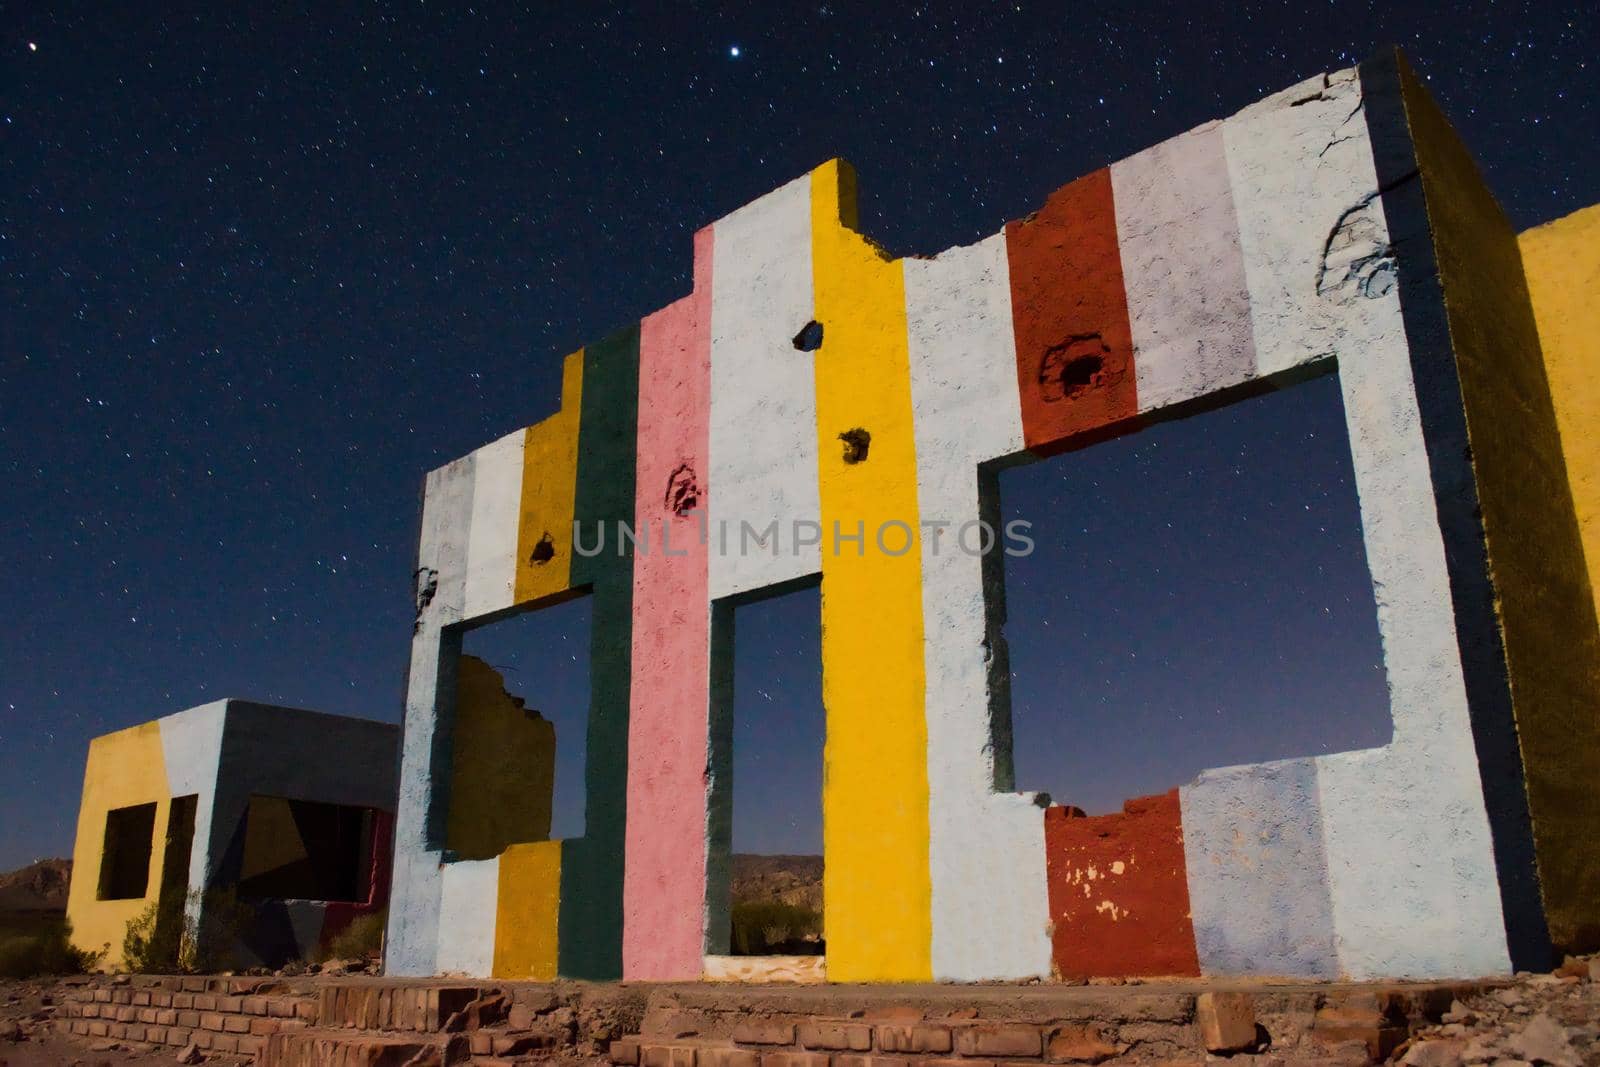 Starry night sky over a derelict house in the middle of the desert near Uspallata, Mendoza, Argentina. by hernan_hyper